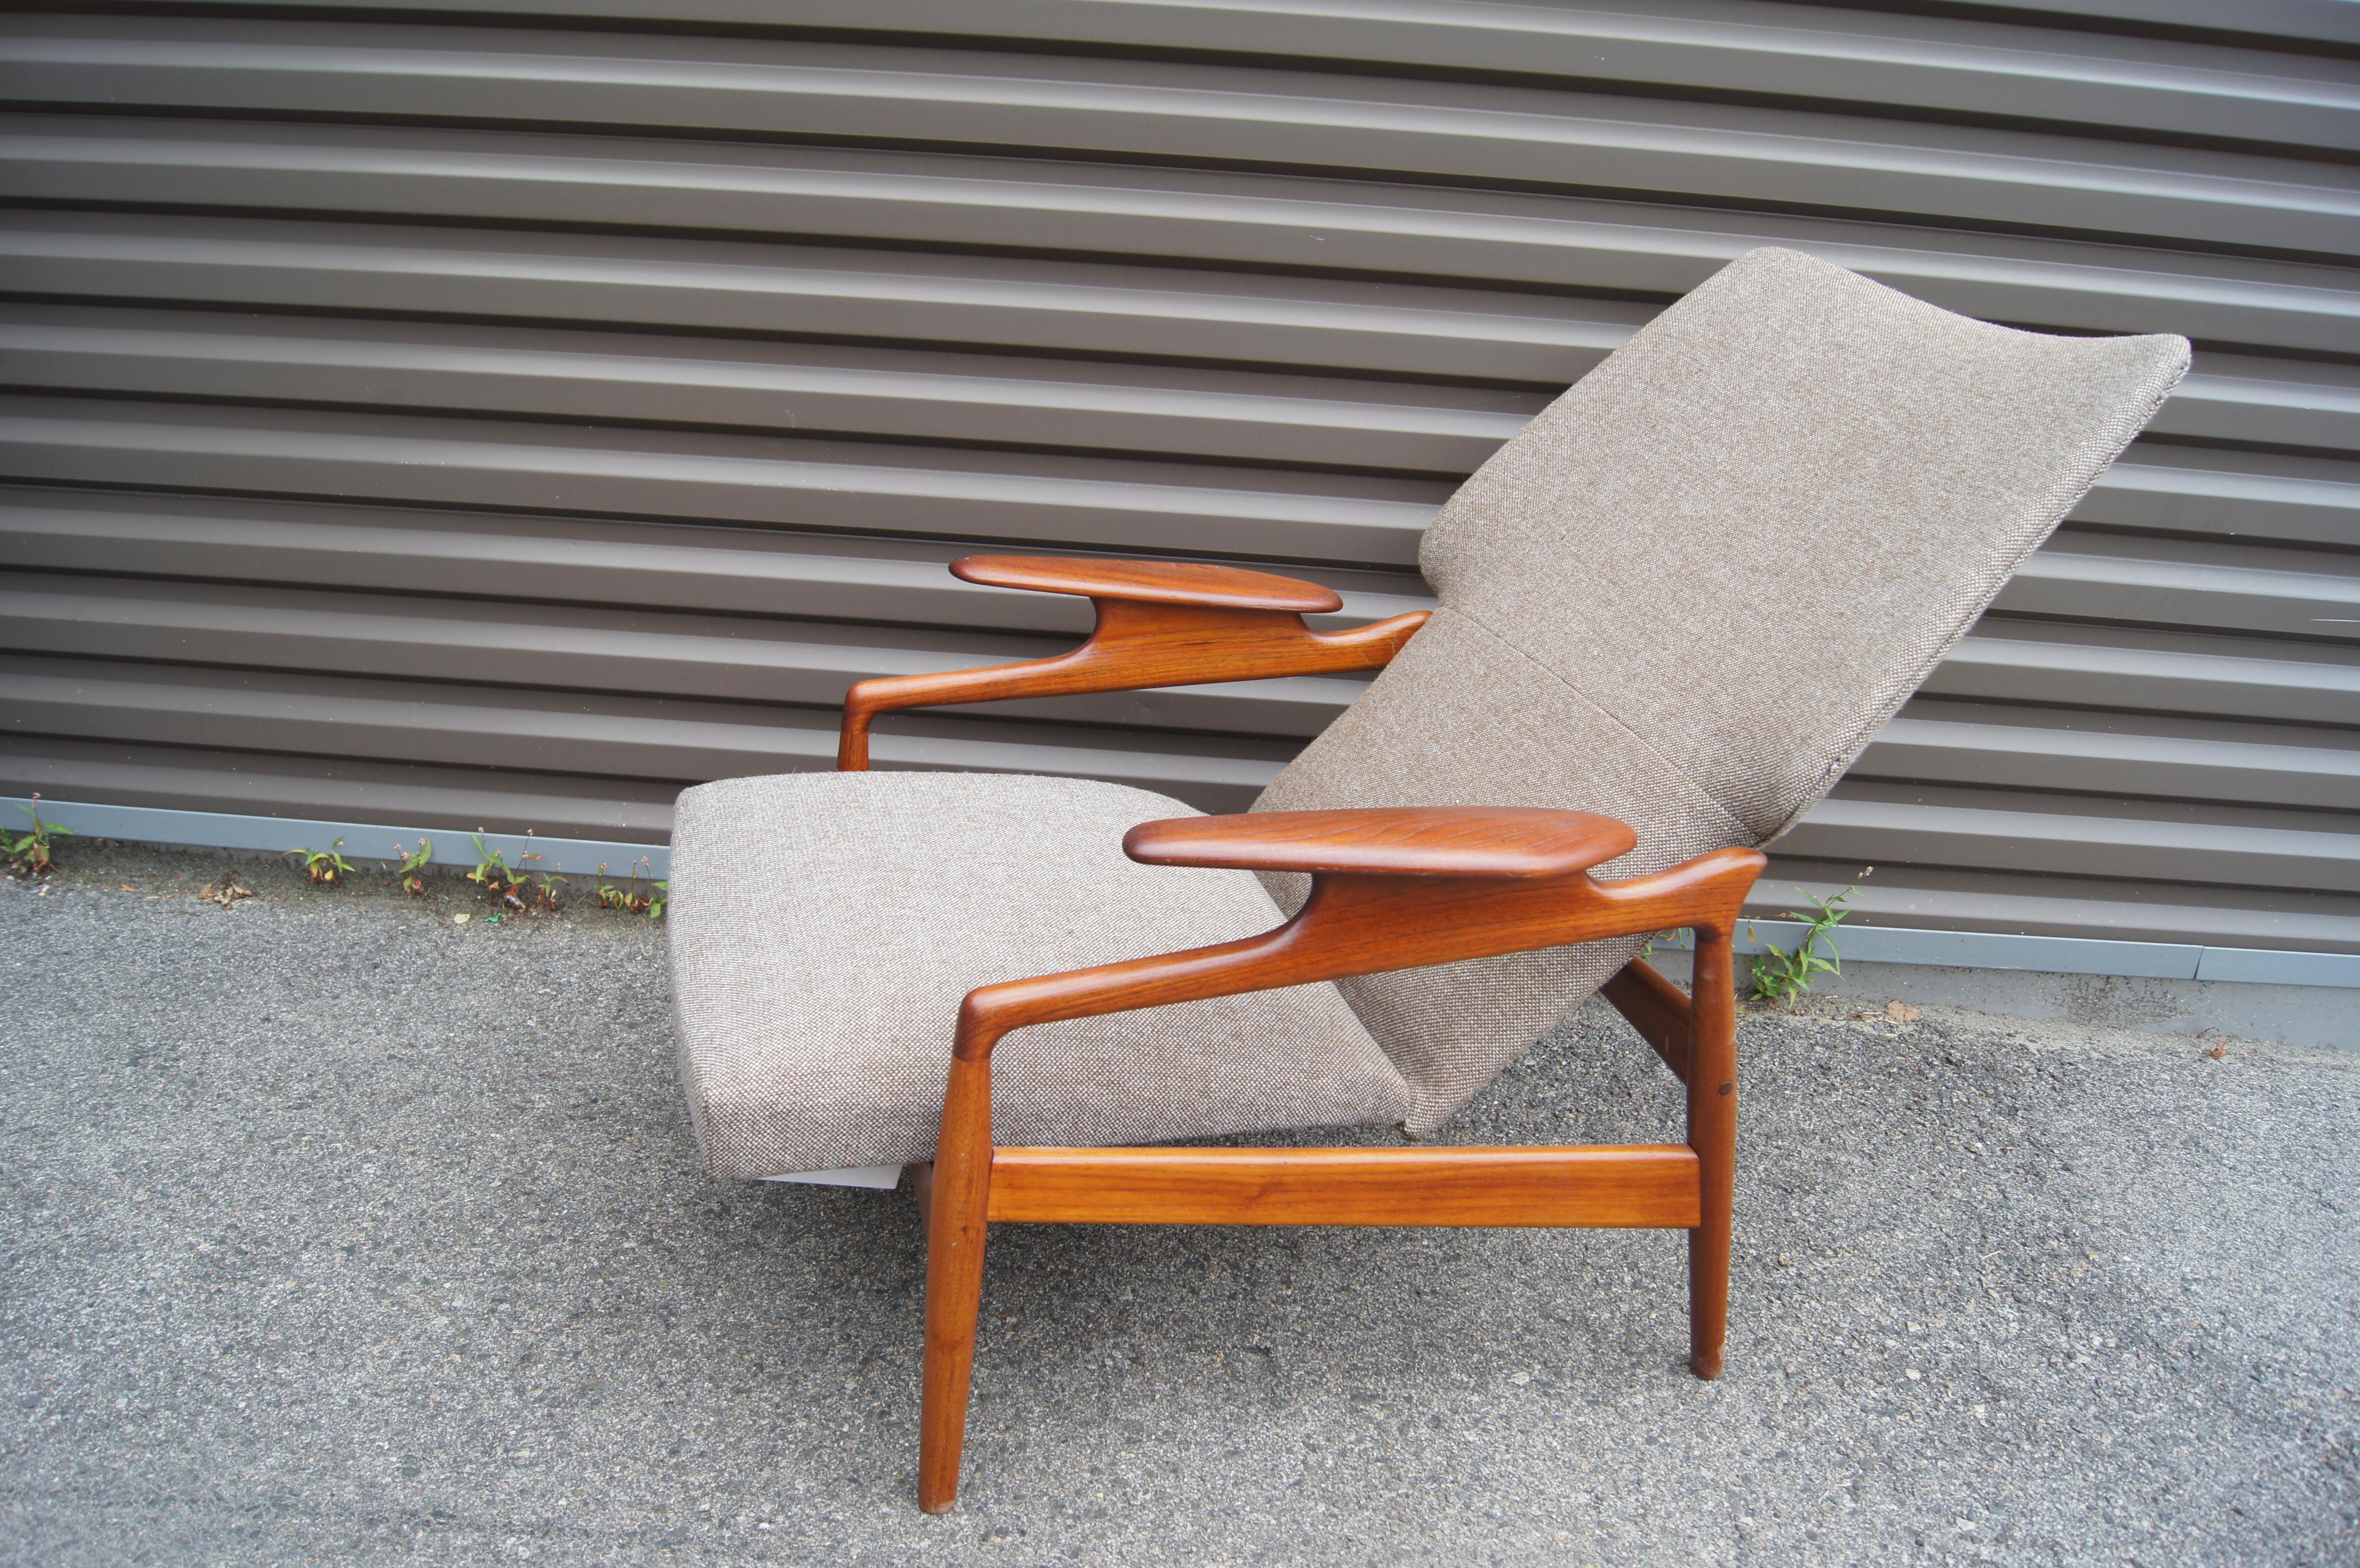 This 1960s teak lounge chair, by the Danish designer John Boné for Advance Design, adjusts from an upright to a reclining position. It features a gently curved wing-back profile and sculptural armrests. The chair has been refinished to bring out the